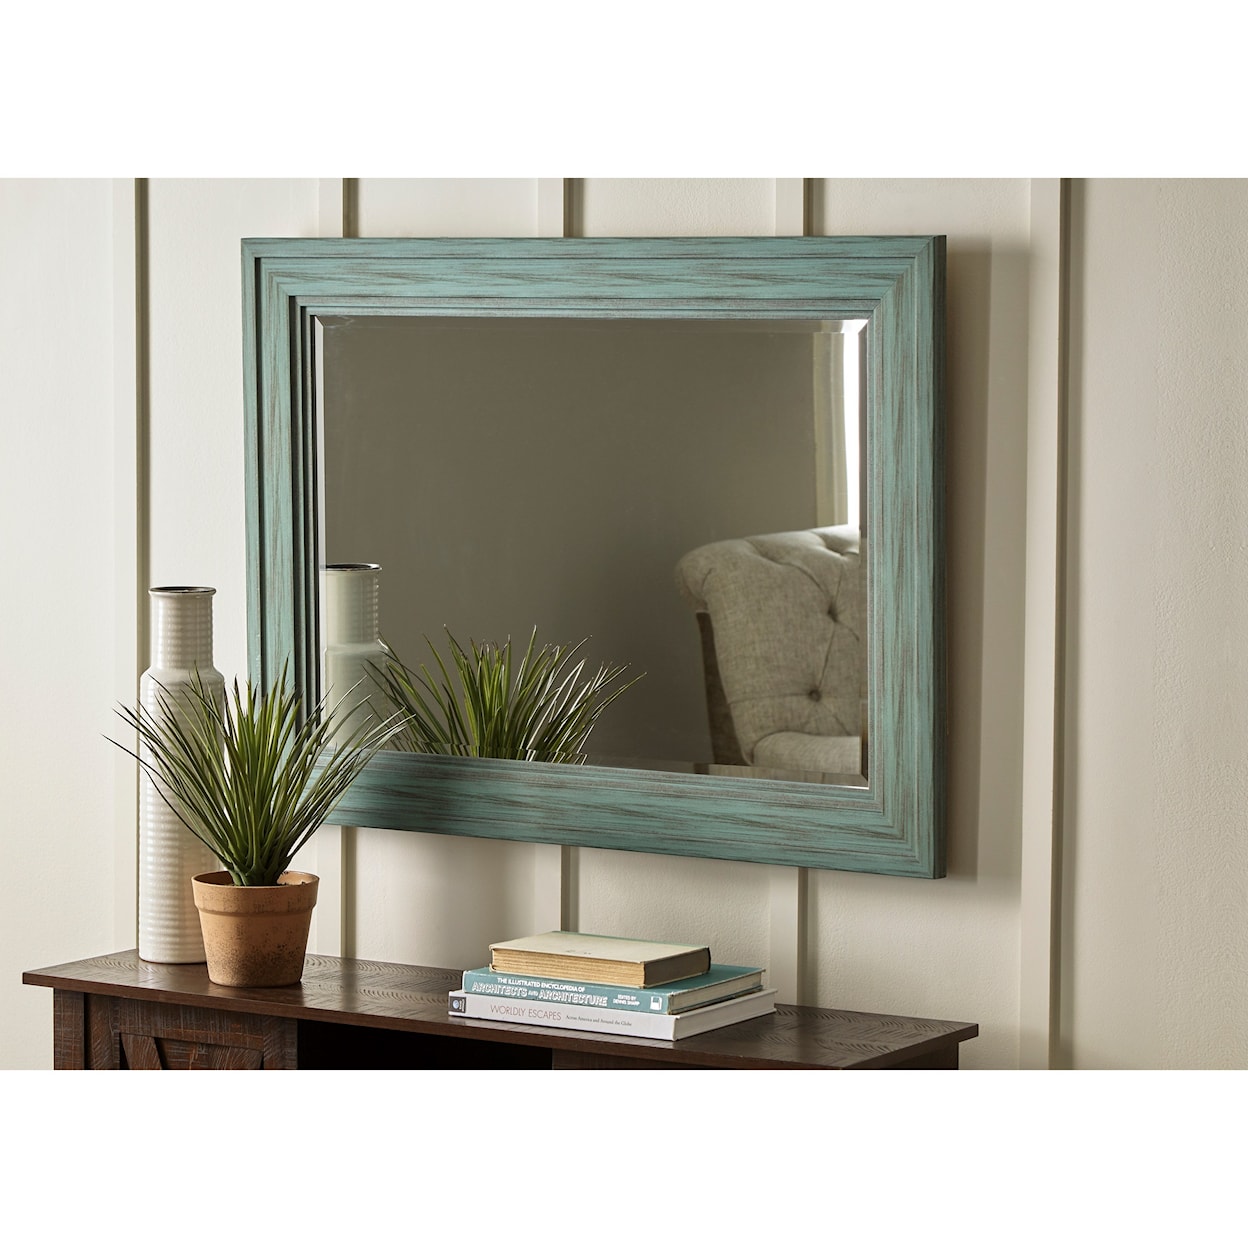 Signature Design by Ashley Accent Mirrors Jacee Antique Teal Accent Mirror